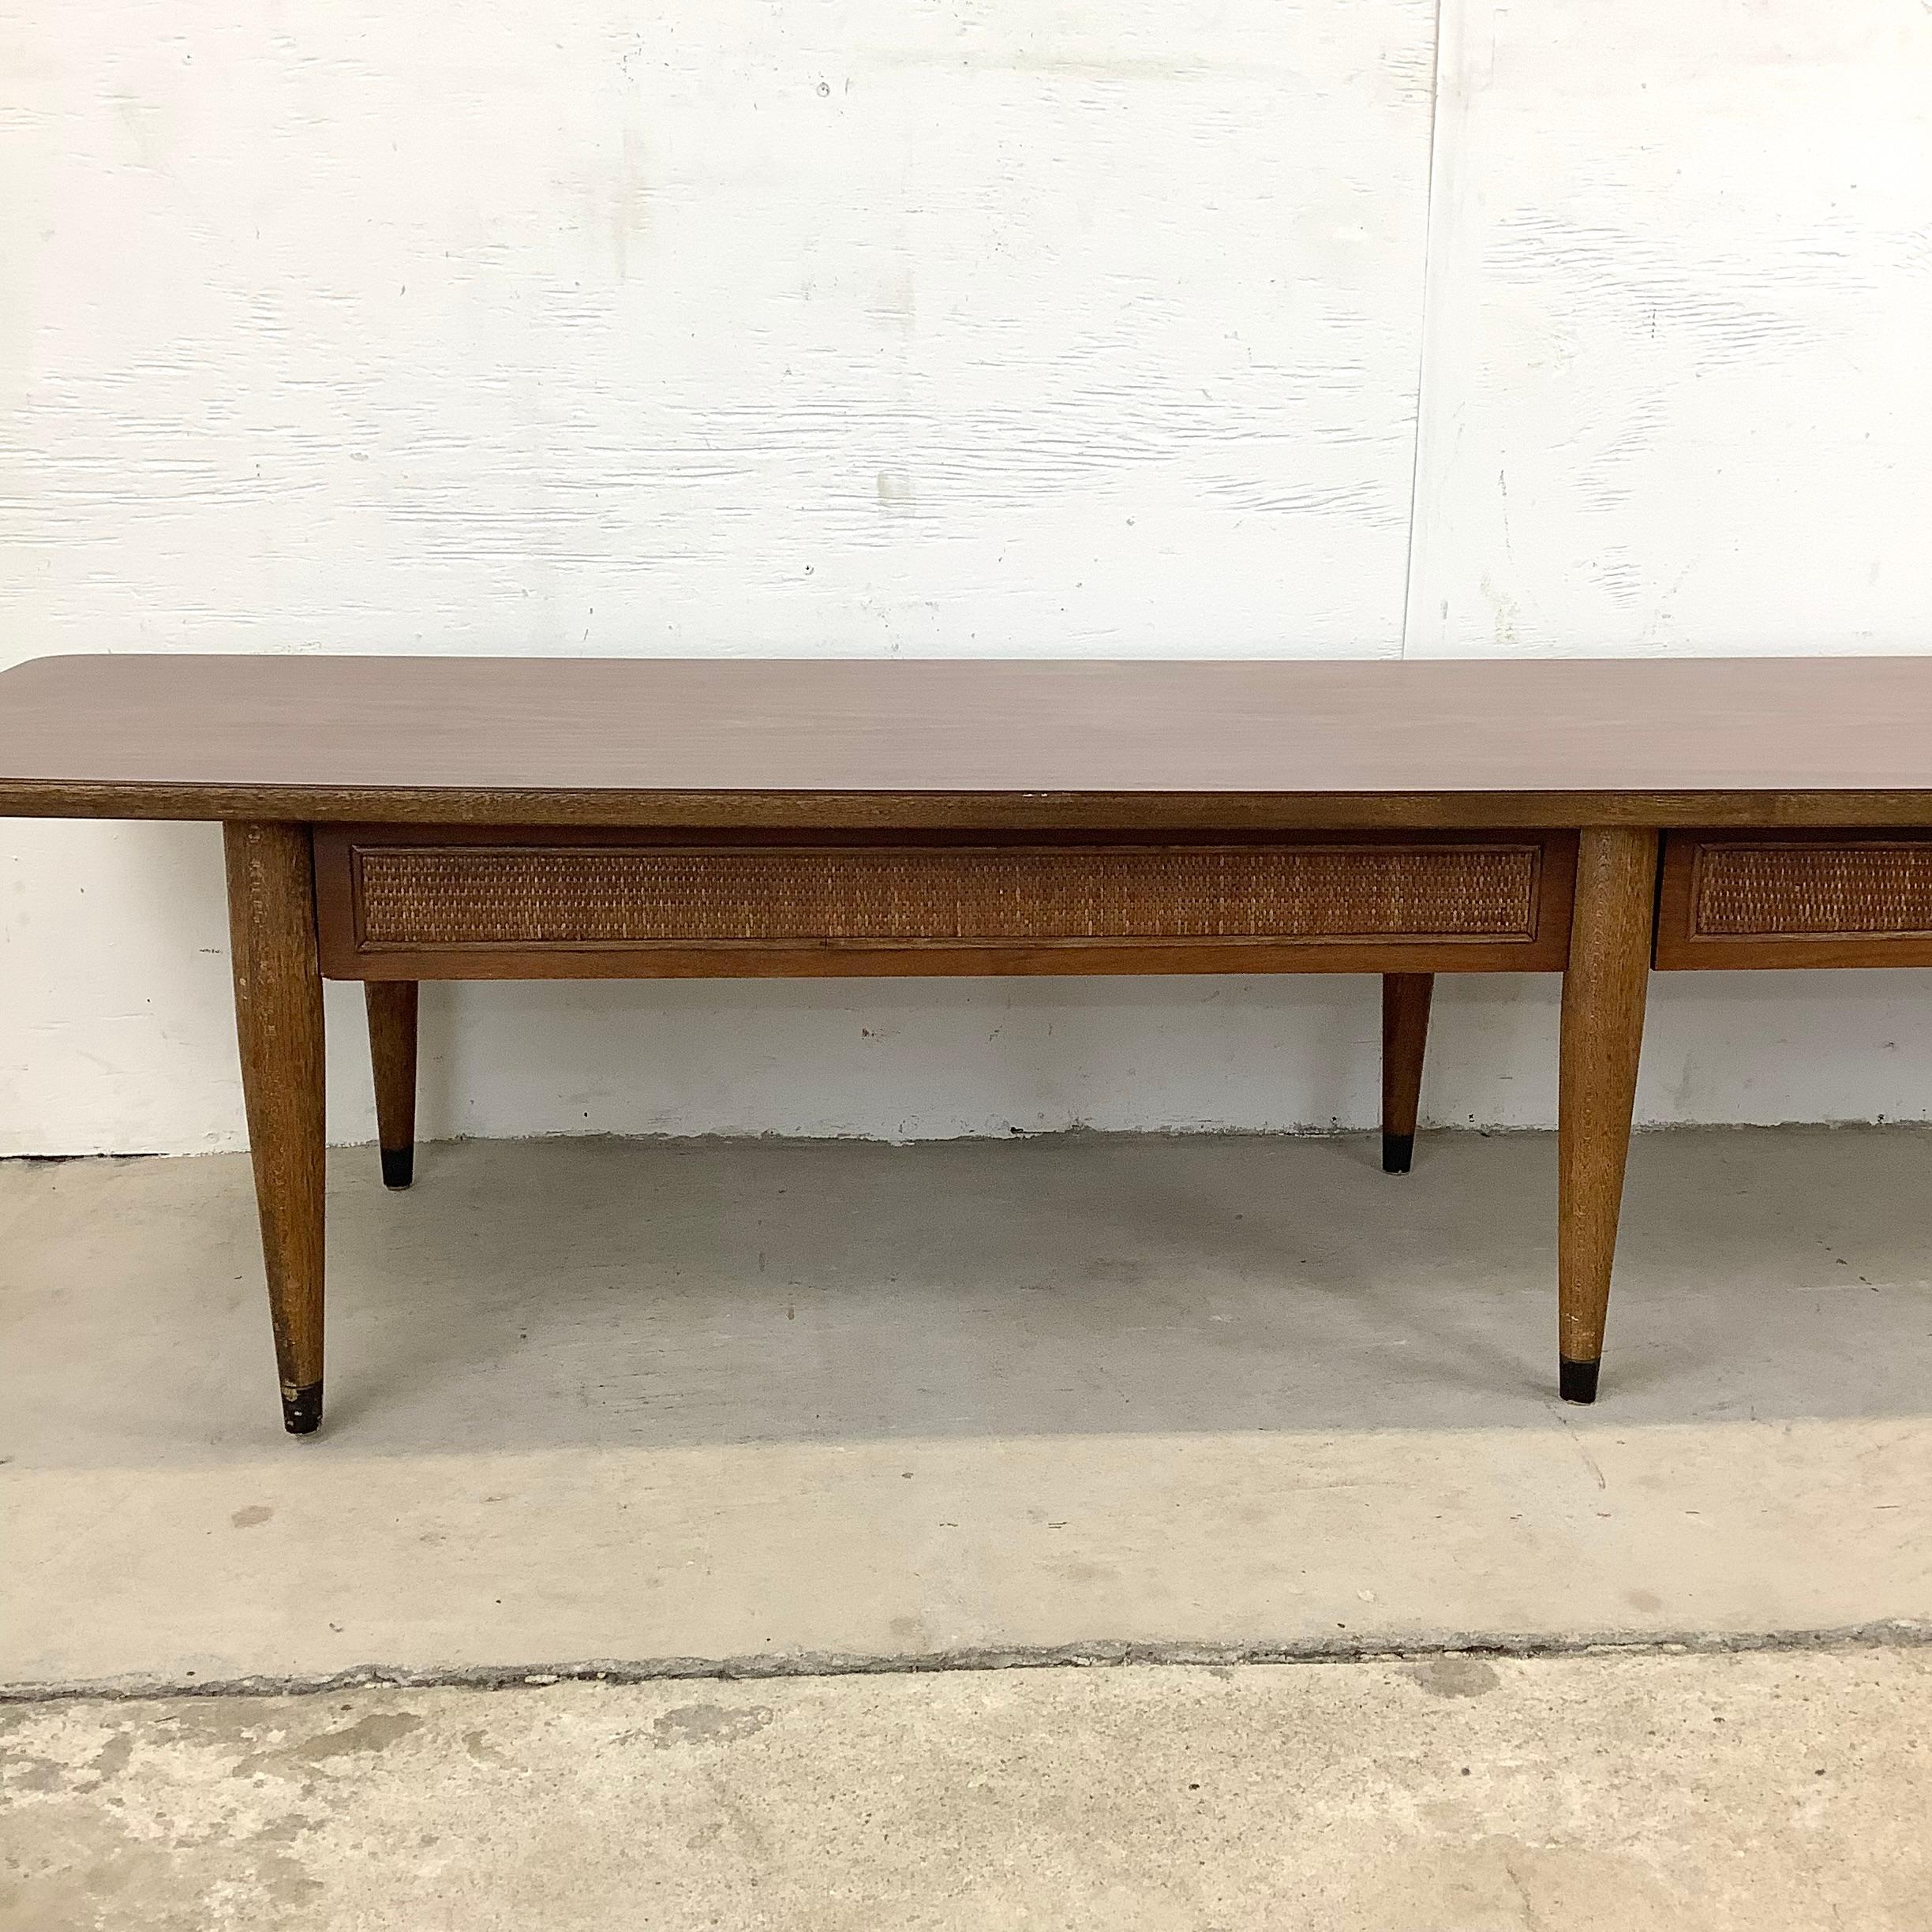 This long and low midcentury coffee table from American of Martinsville features a furable faux wood laminate table top and Dual drawers for plenty of storage. Ideal for sofa seating area this six foot vintage modern coffee table makes a simple yet